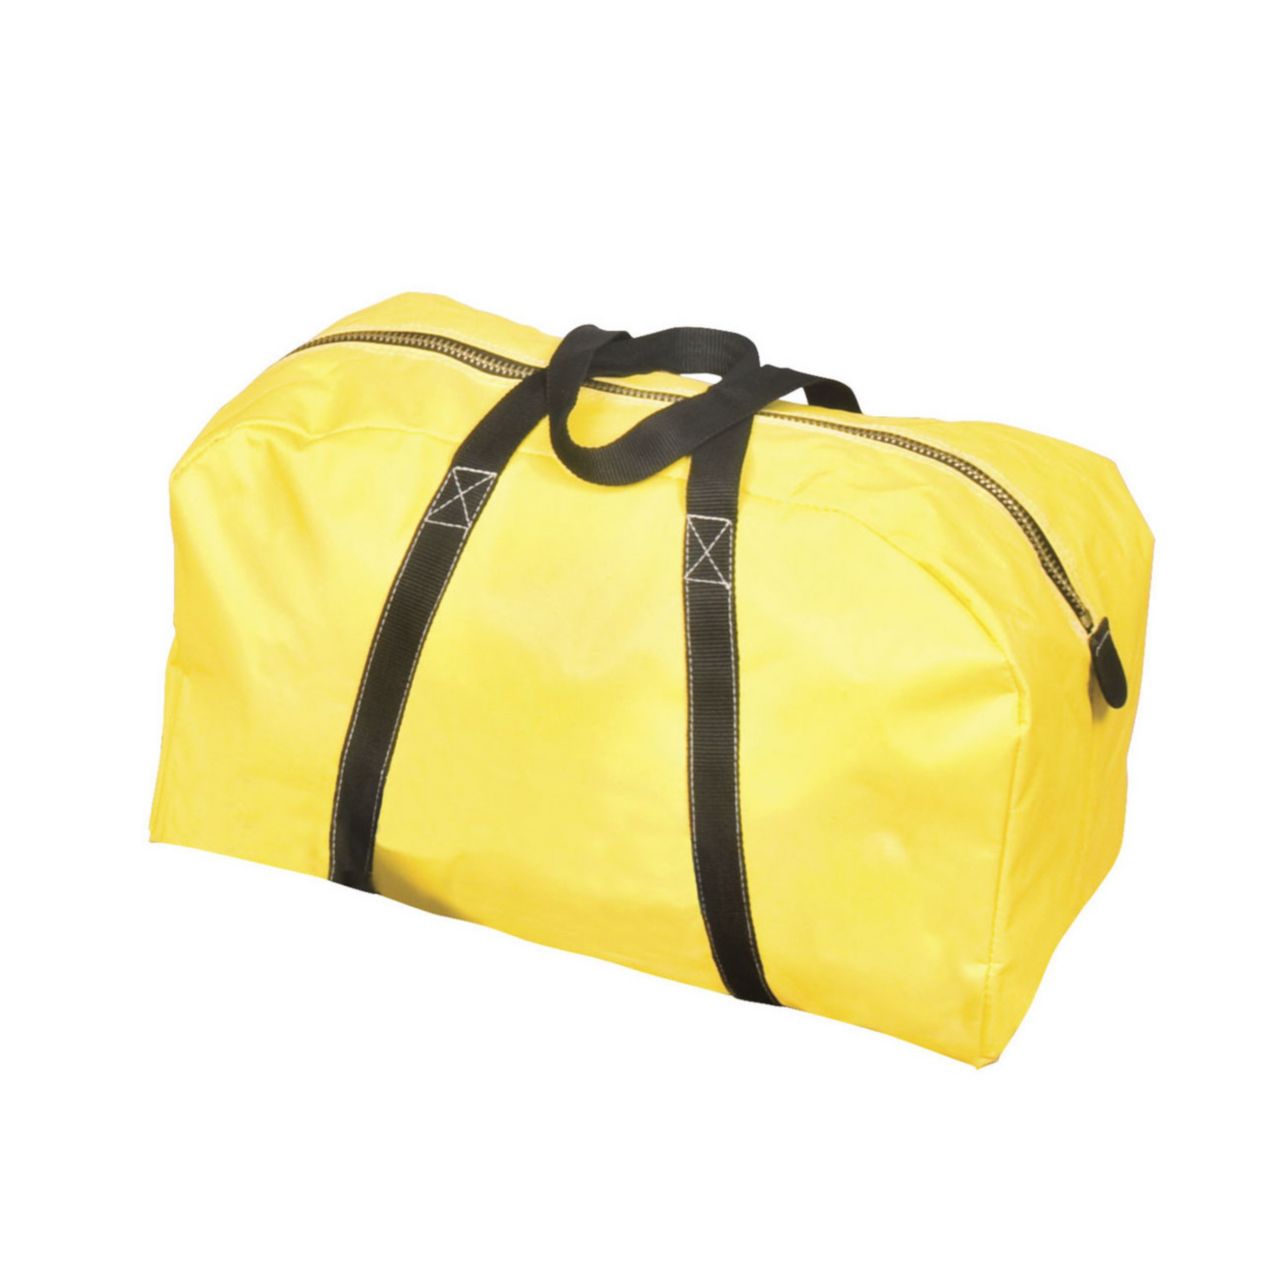 Miller Fall Protection Equipment Bag